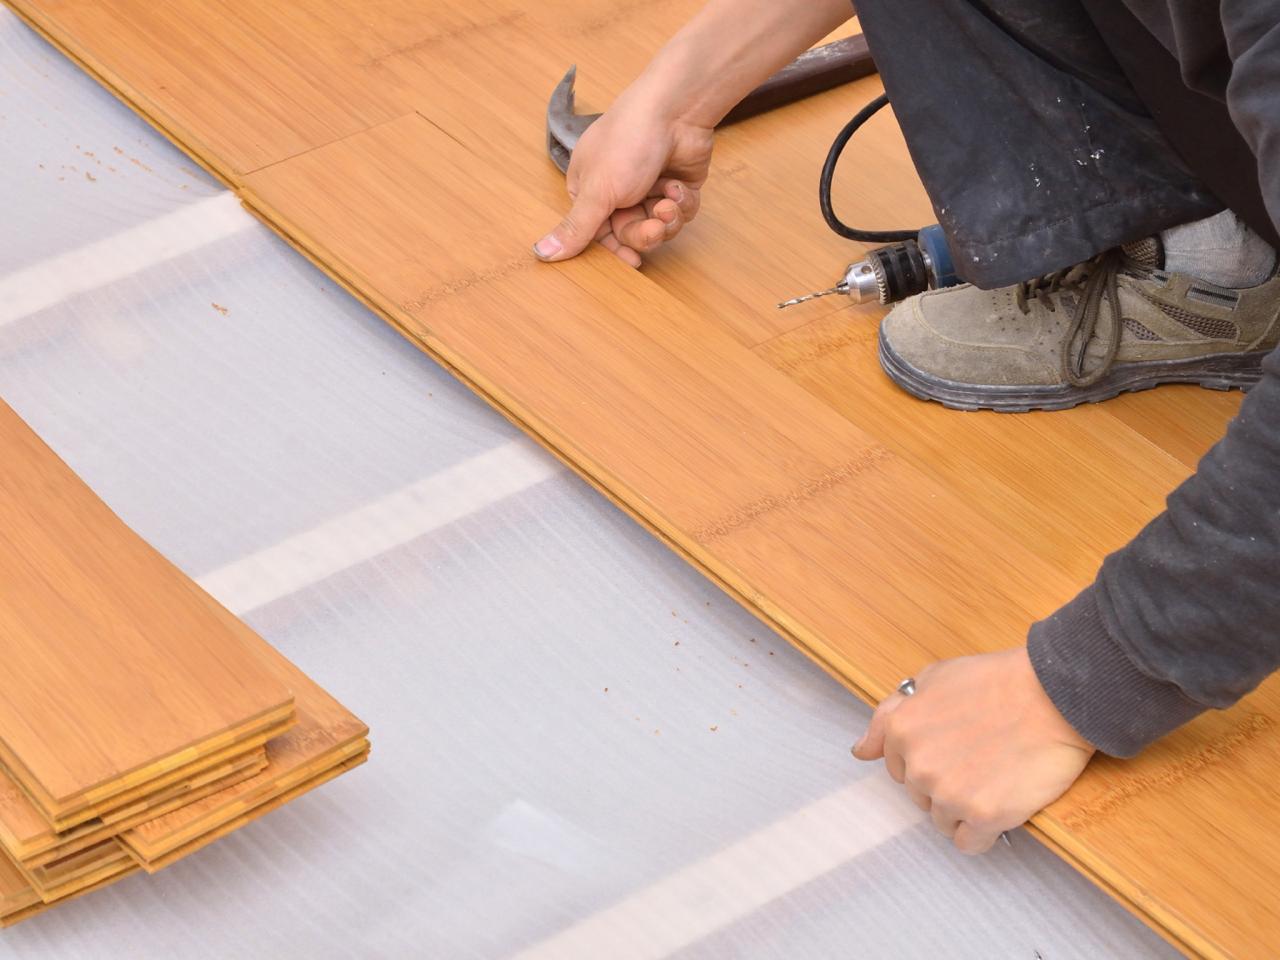 Bamboo Floor Installation Diy, How To Hold Down Laminate Flooring